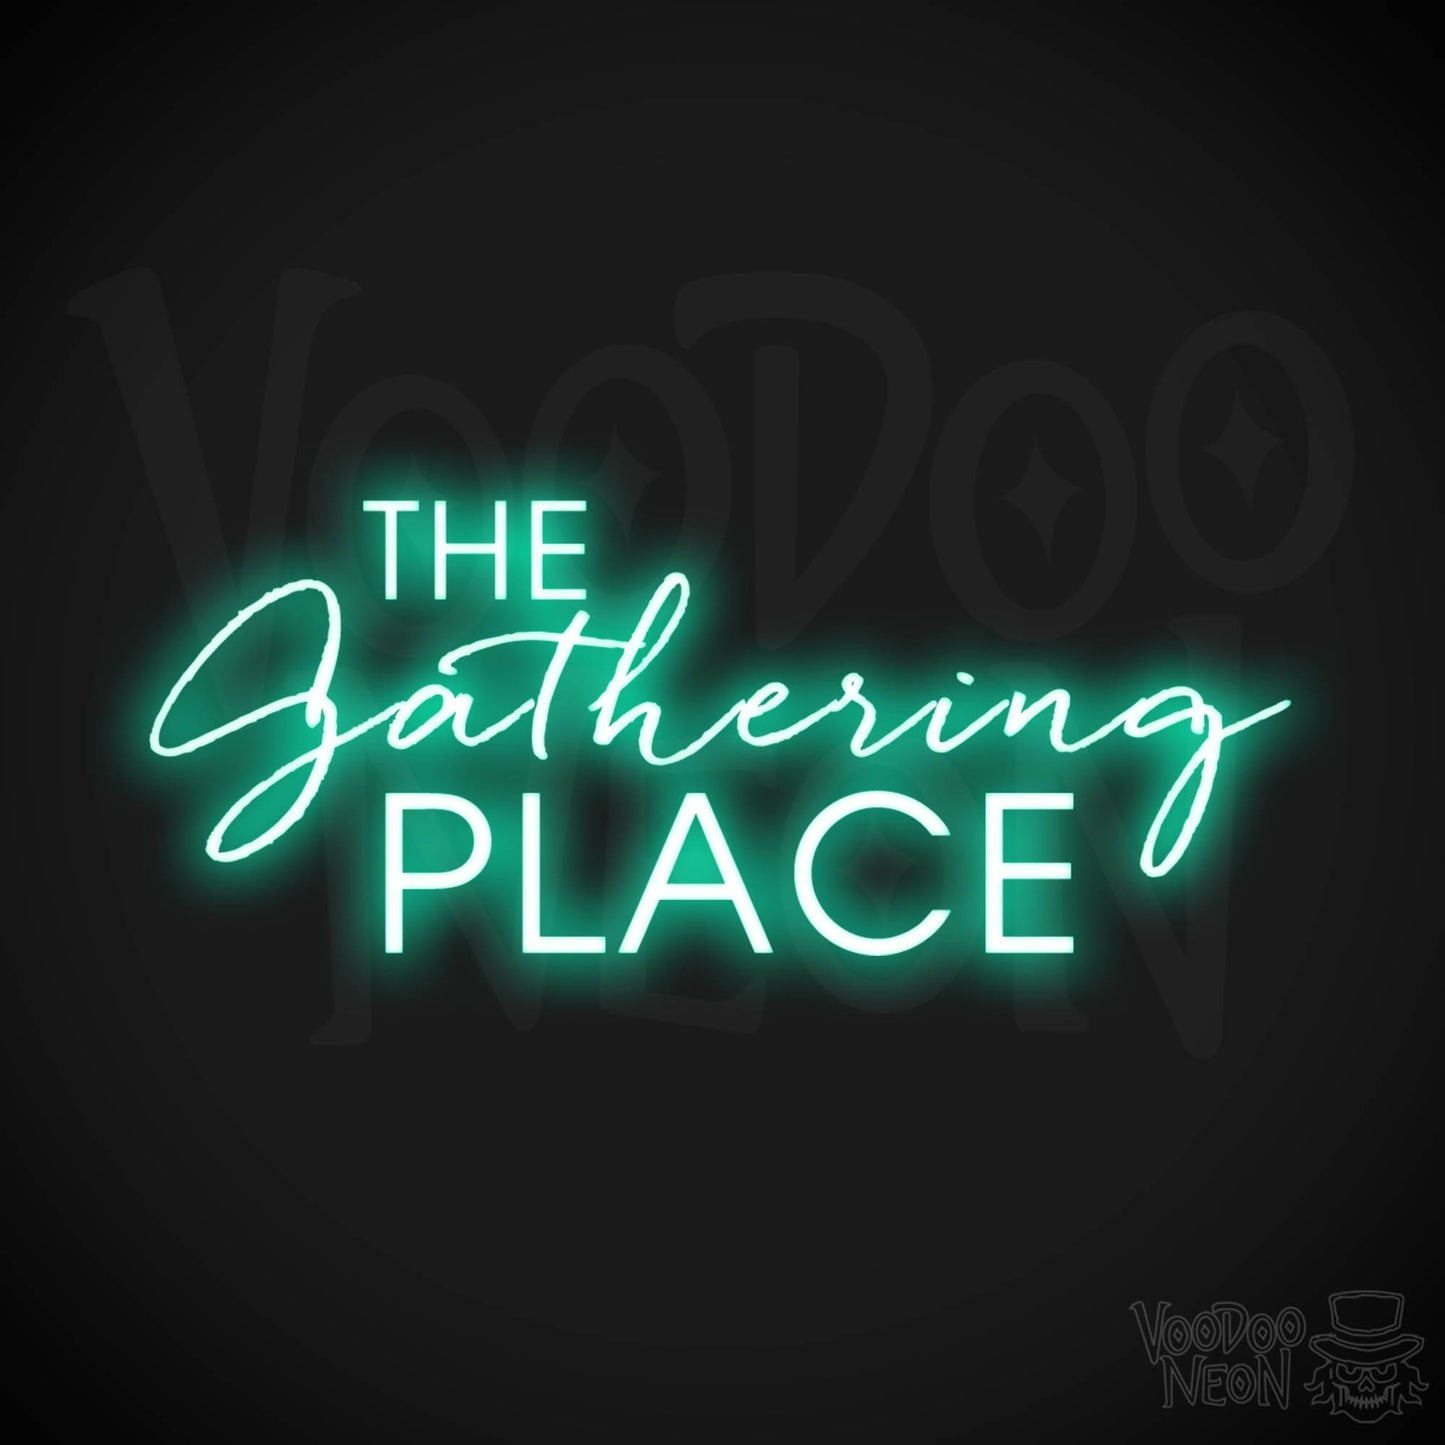 The Gathering Place Neon Sign - Neon The Gathering Place Sign - Wall Art - Color Light Green